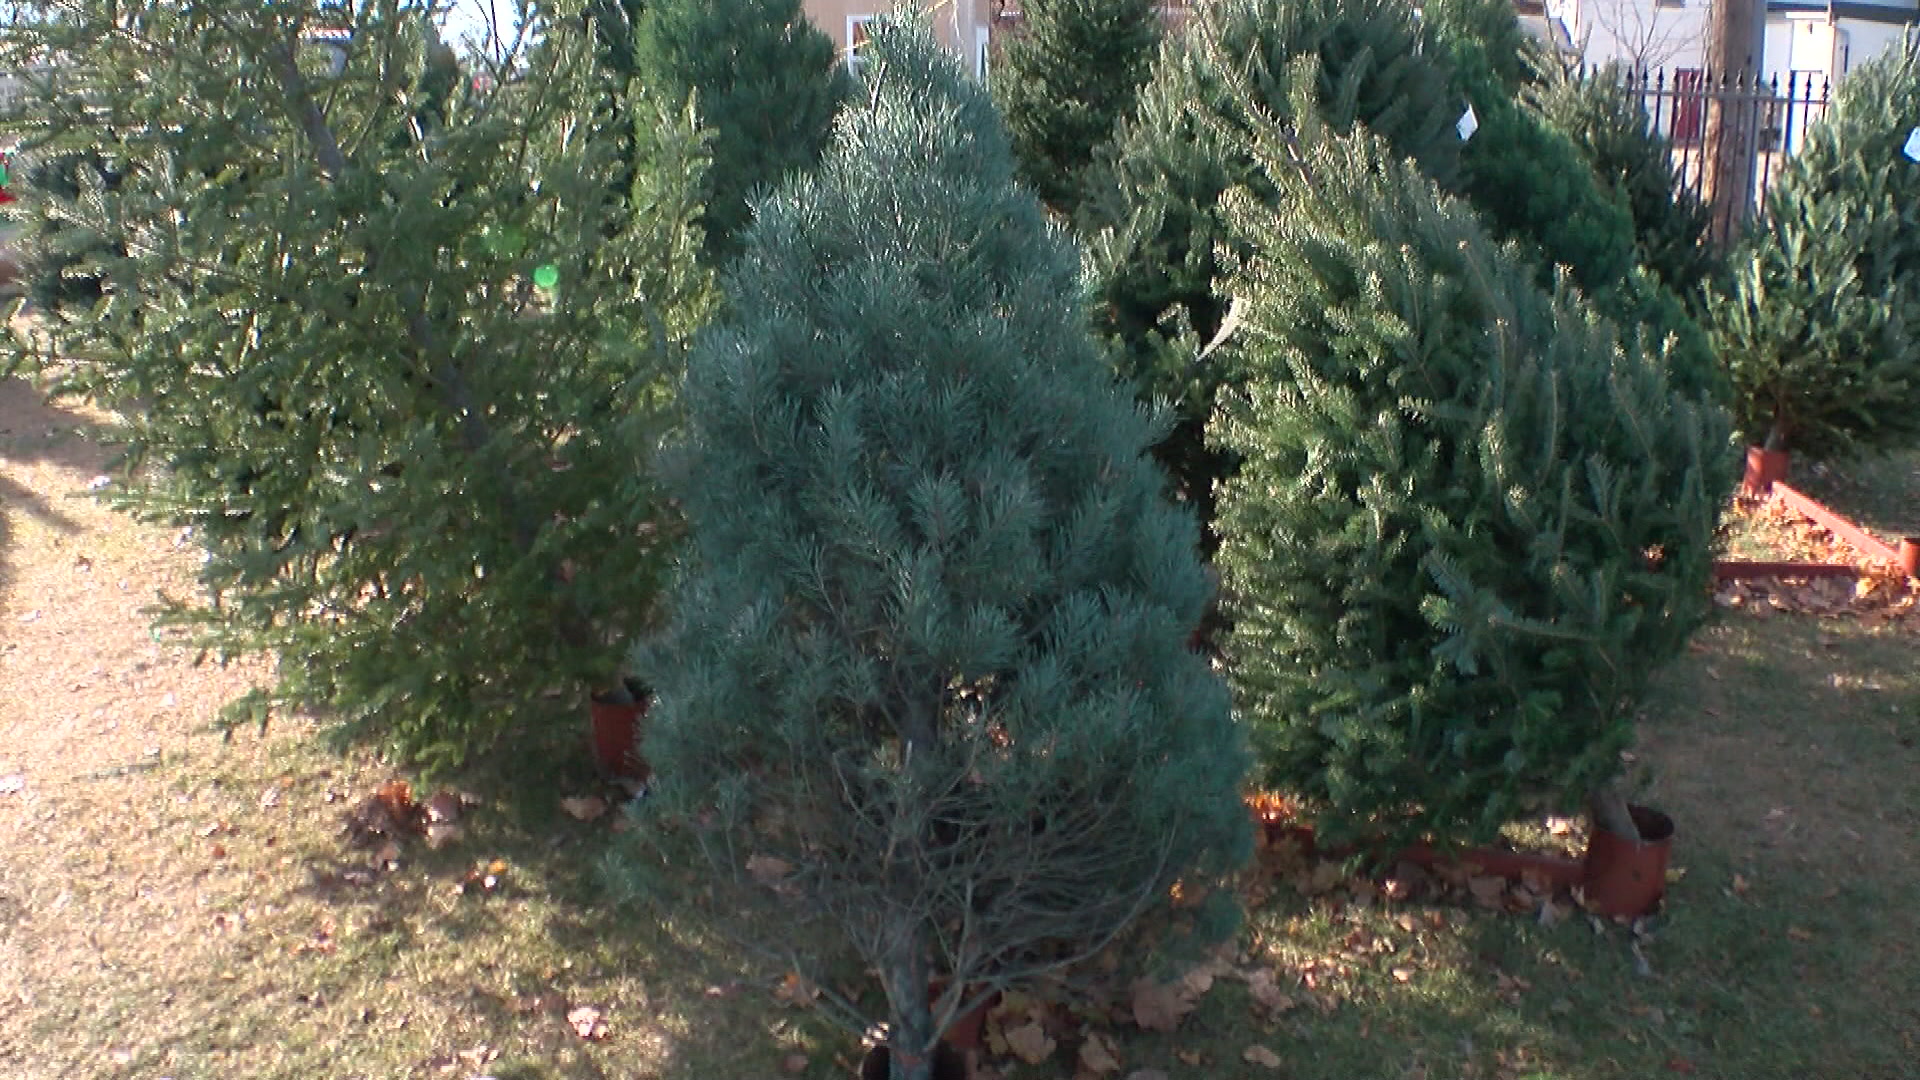 ‘Never Let It Run Out Of Water’: Many Christmas Trees Drier Than Normal Due To Drought